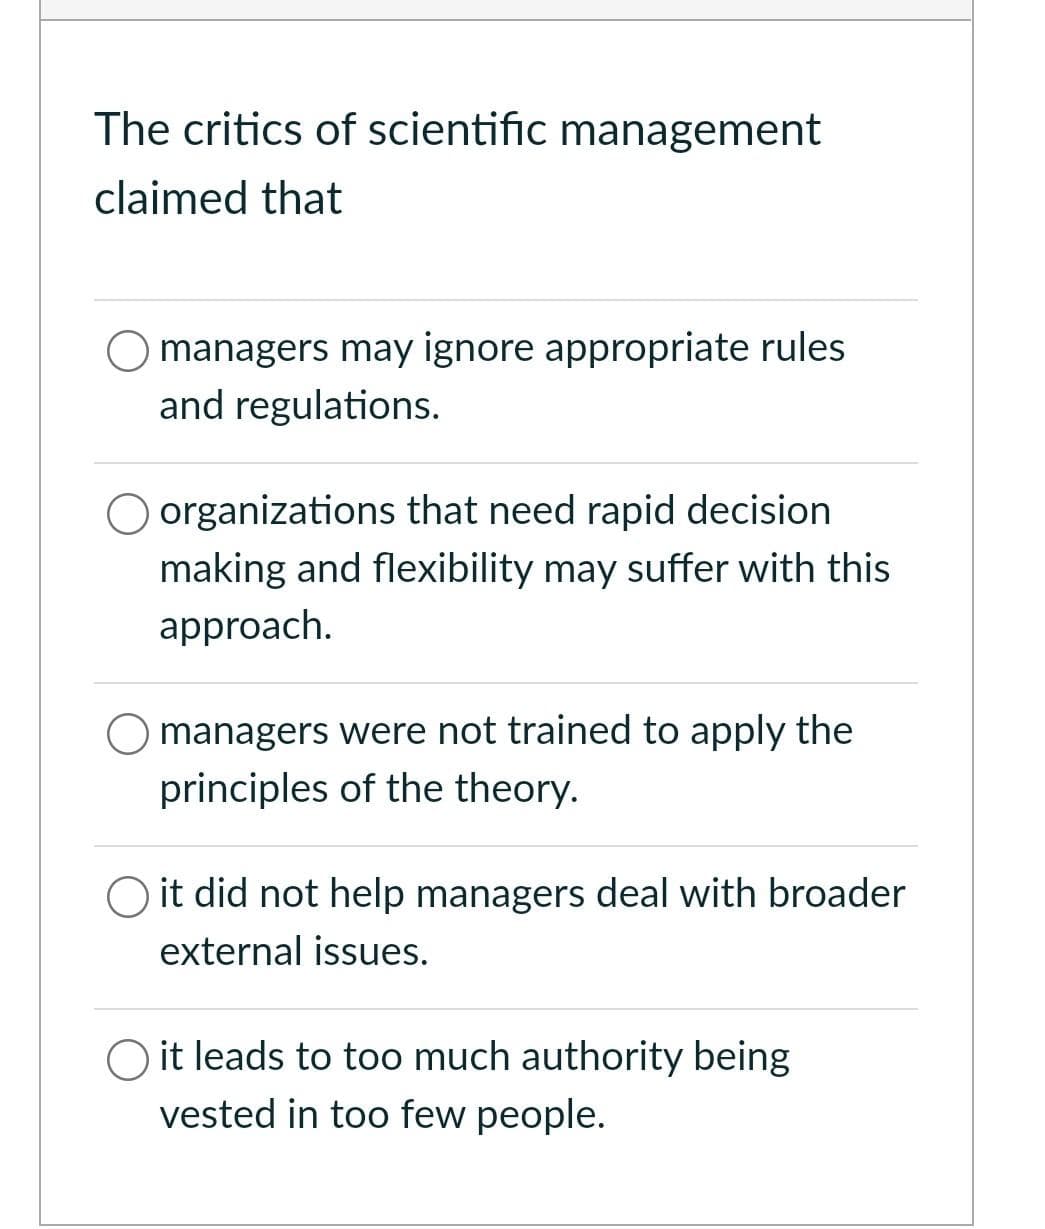 The critics of scientific management
claimed that
O managers may ignore appropriate rules
and regulations.
organizations that need rapid decision
making and flexibility may suffer with this
approach.
managers were not trained to apply the
principles of the theory.
O it did not help managers deal with broader
external issues.
O it leads to too much authority being
vested in too few people.
